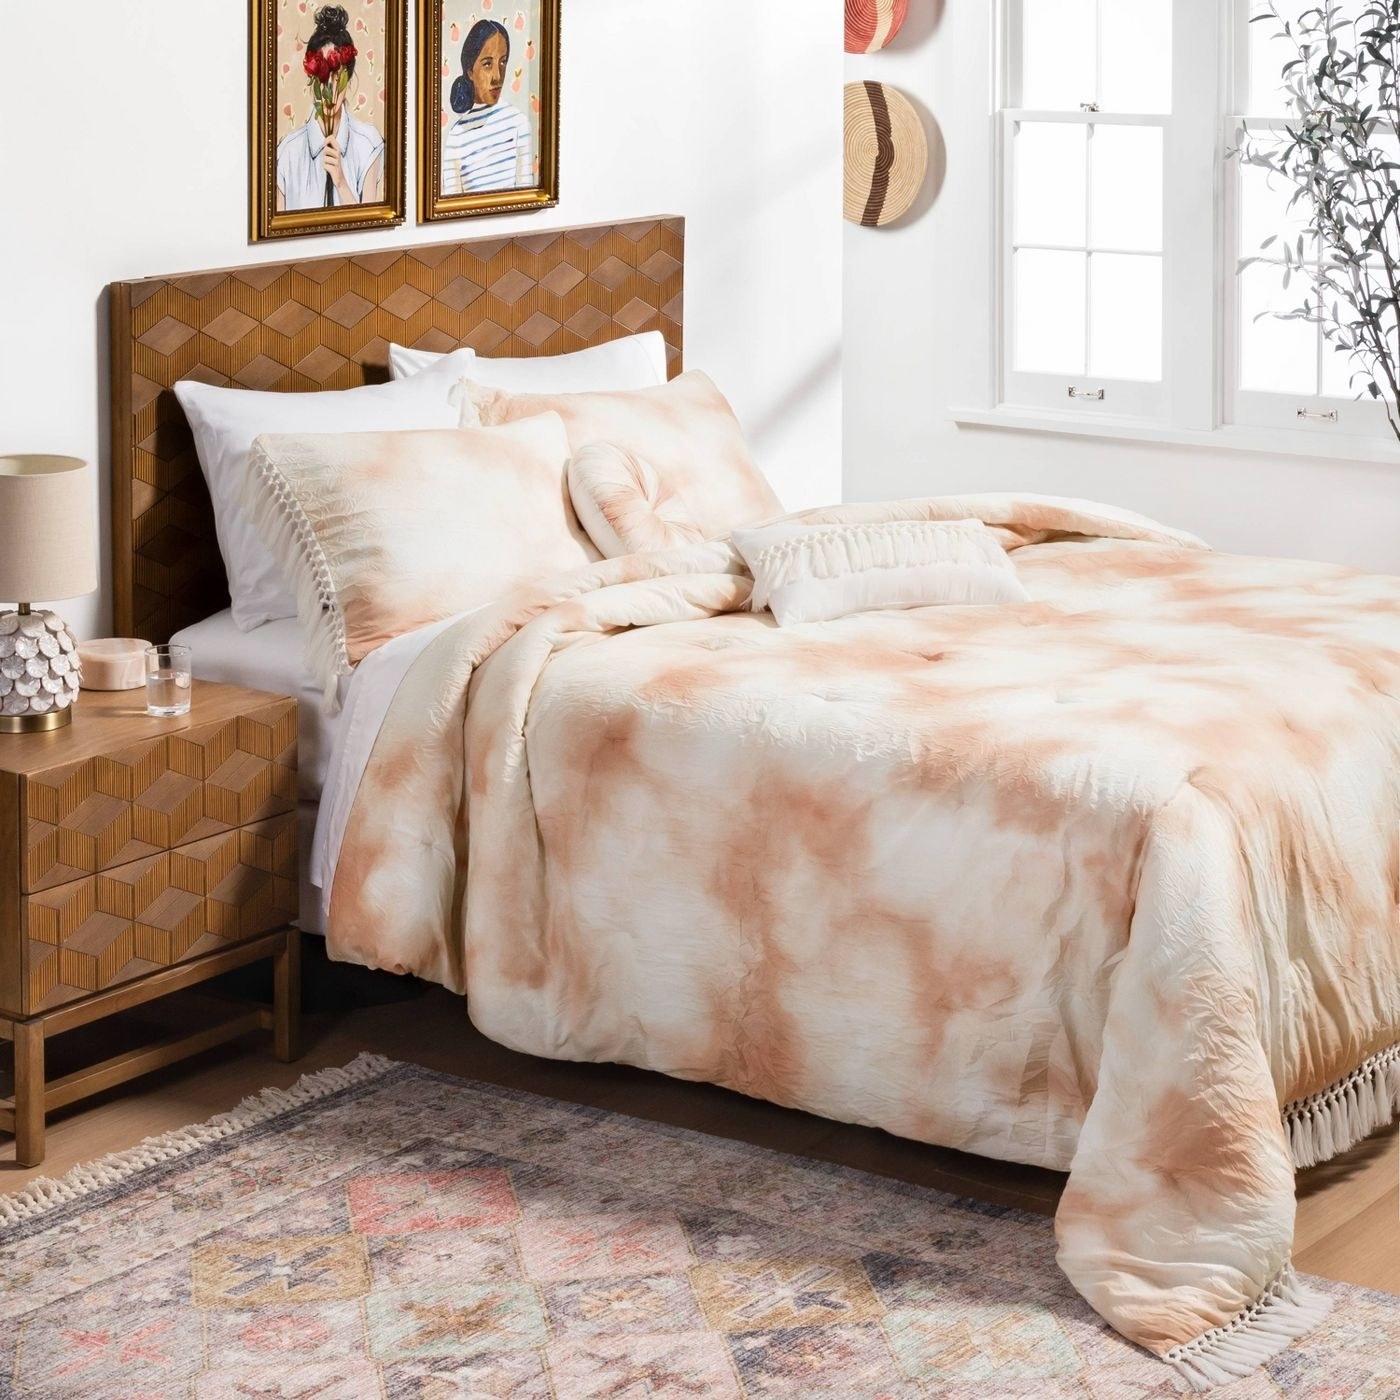 A wooden bedroom set with a taupe tie-dye comforter